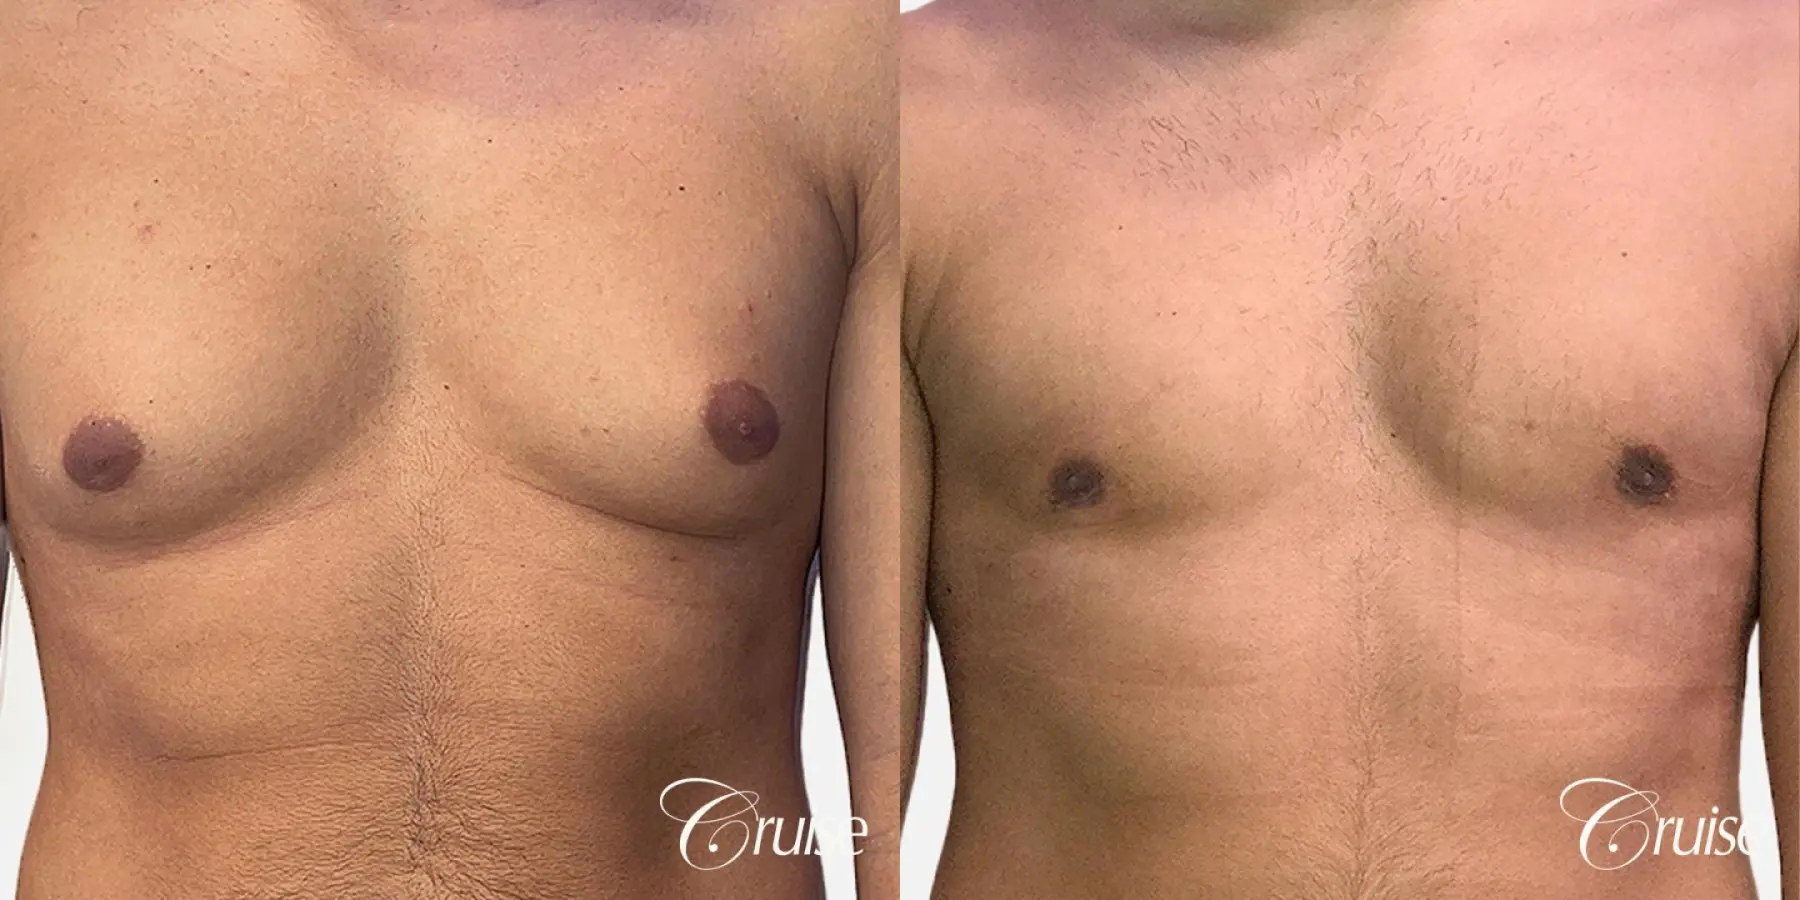 Type 2 Latino Gynecomastia Removal - Before and After 1